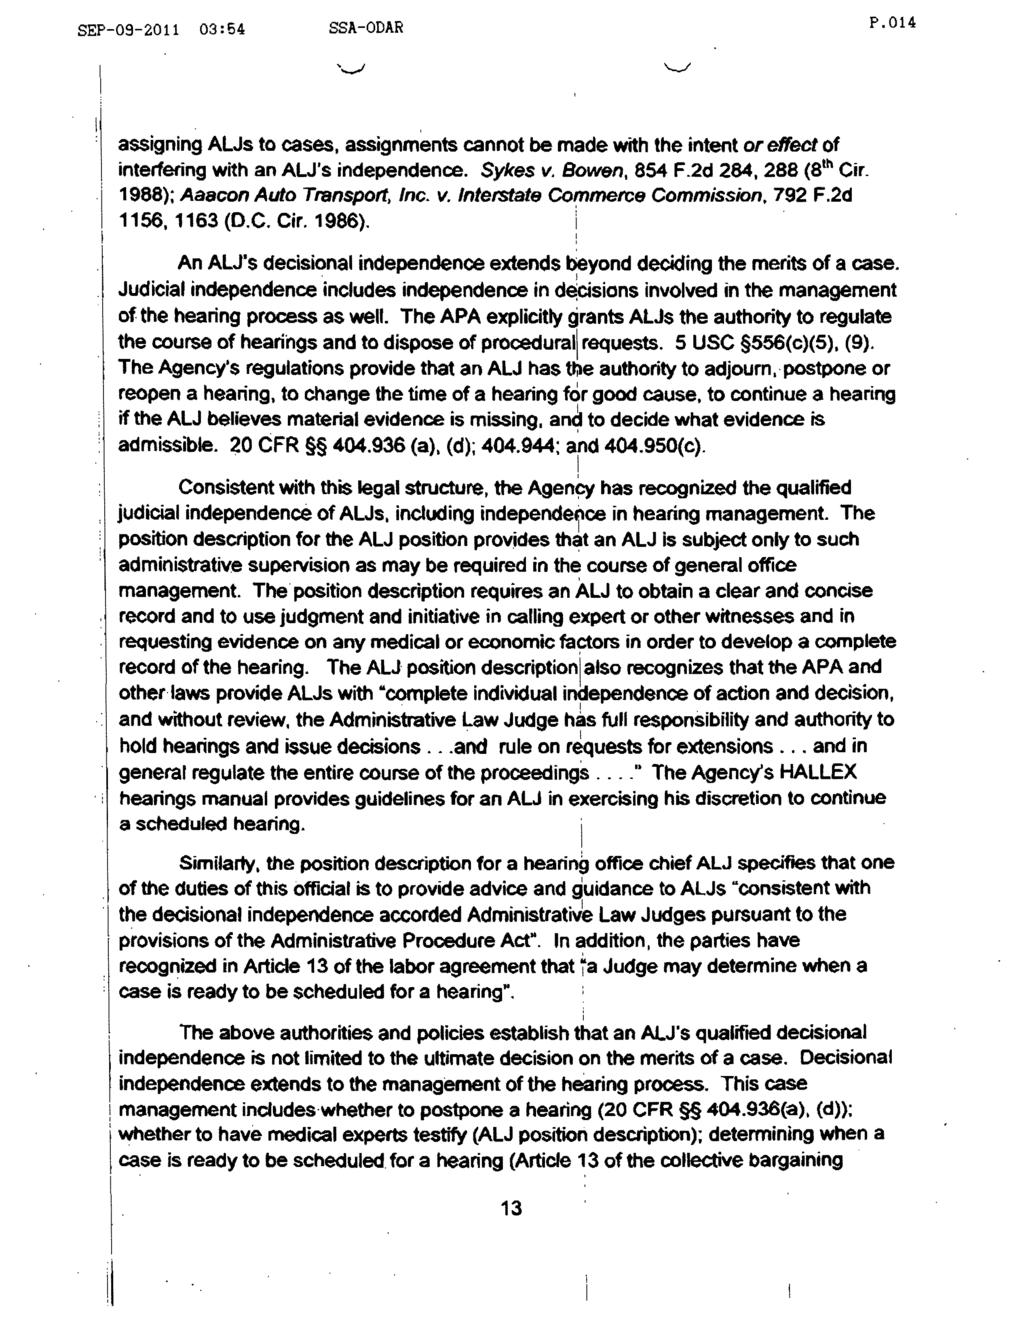 SEP-09-2011 03:64 SSA-ODAR P.014 assgnng ALJs to cases assgnments cannot be made wth the ntent or effect of nterferng wth an AW's ndependence. Sykes v. Bowen. 854 F.2d 284. 288 (8 th Cr.